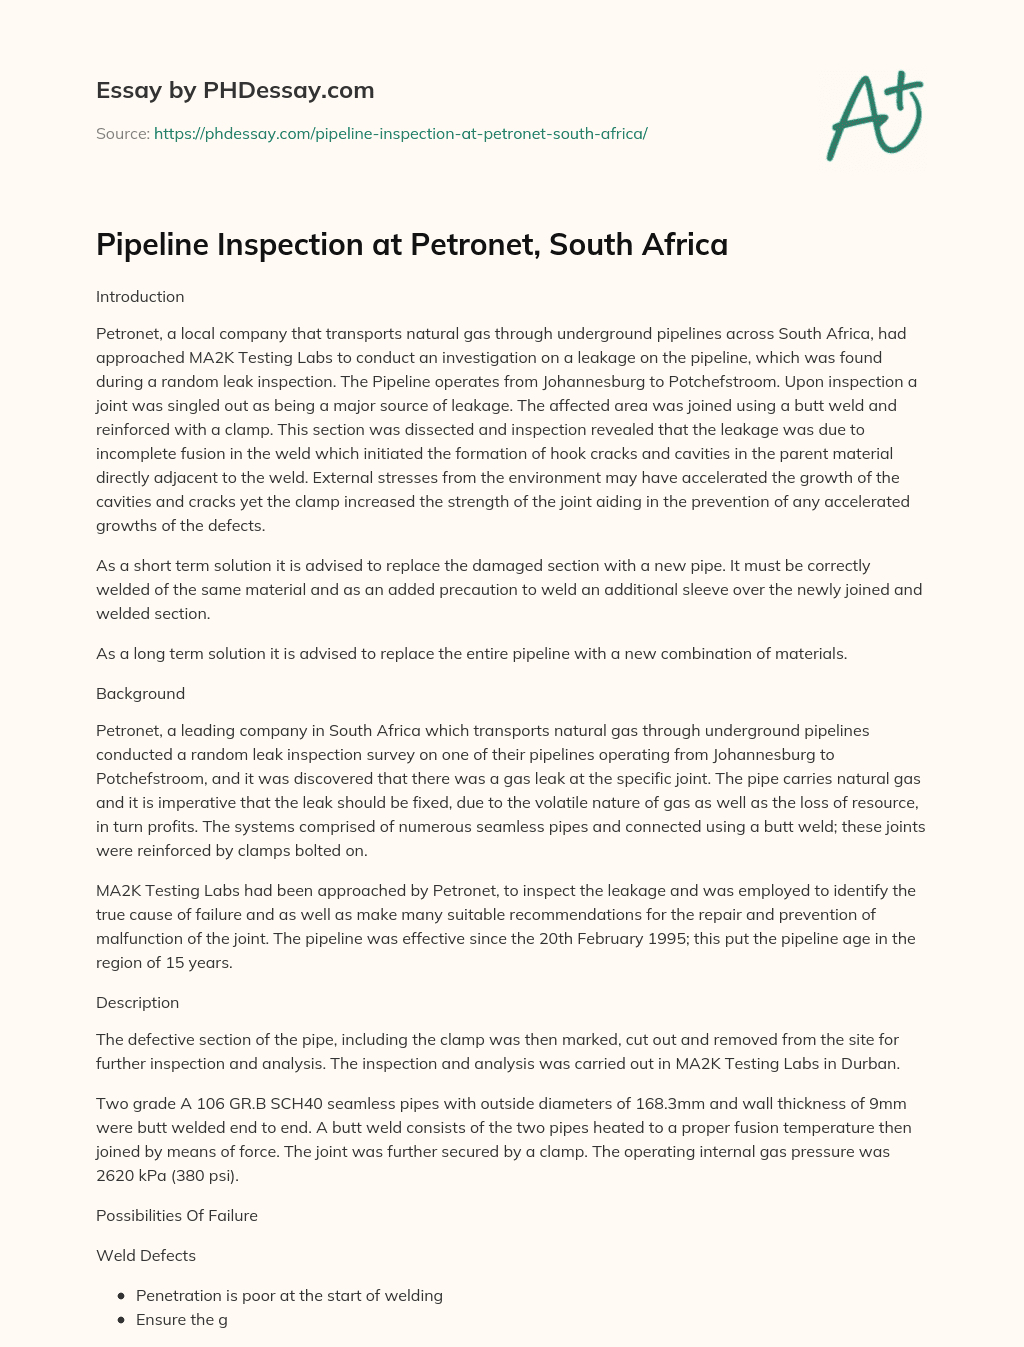 Pipeline Inspection at Petronet, South Africa essay